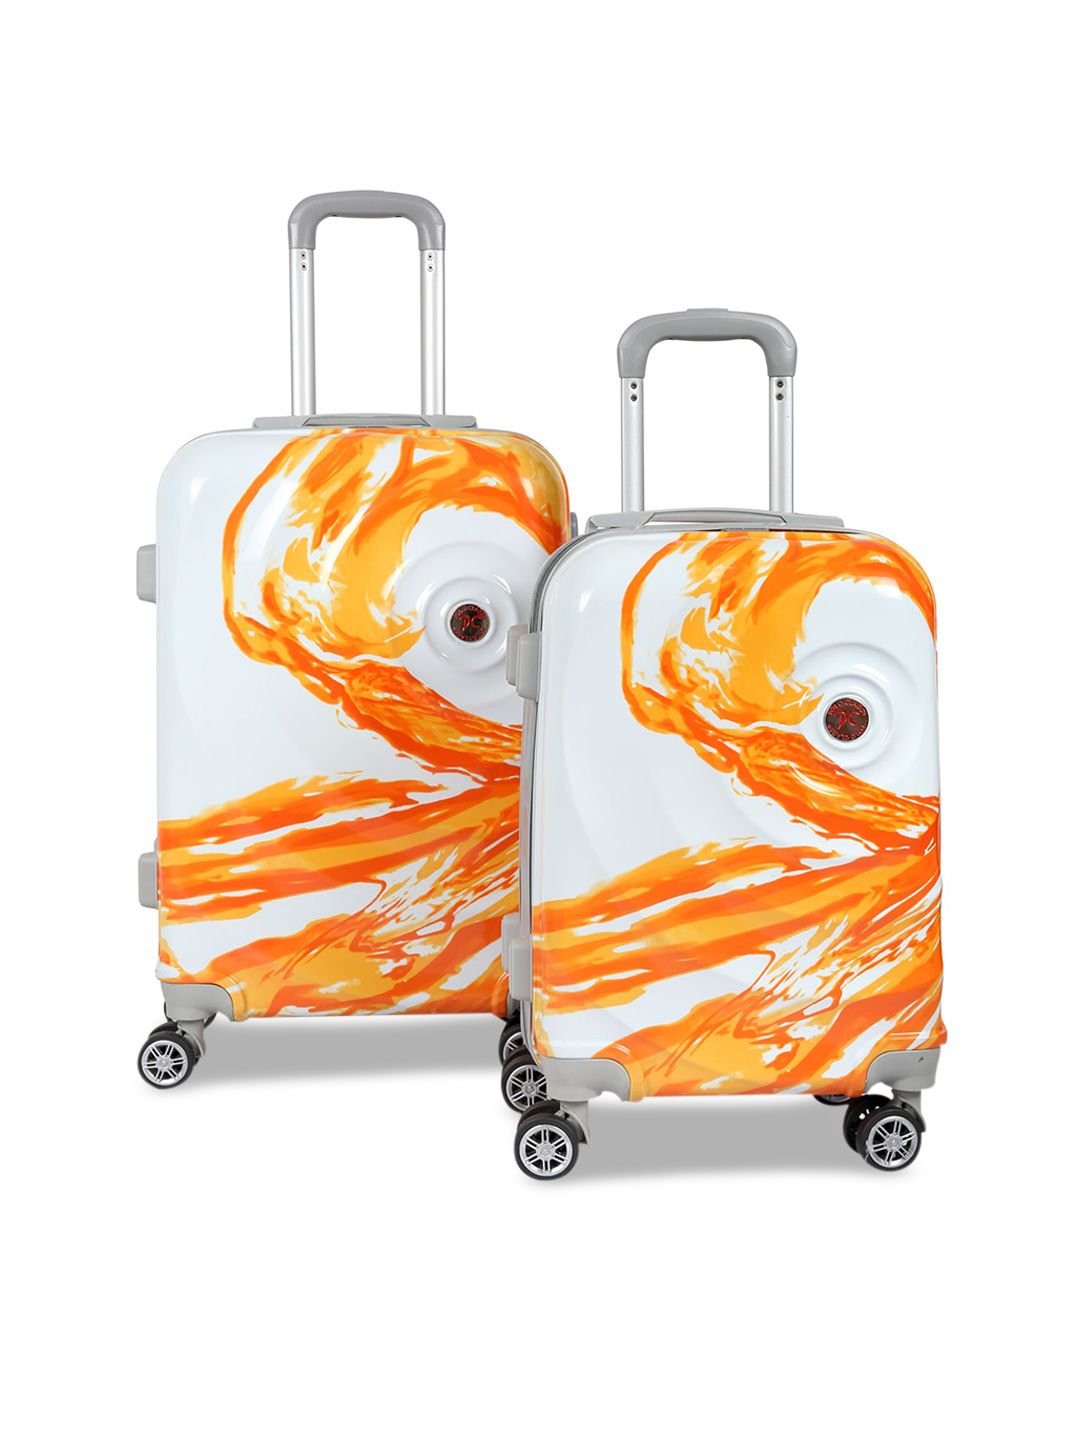 Polo Class Orange & White Set of 2 Printed Hard Case 360 Degree Rotation Trolley Suitcases Price in India